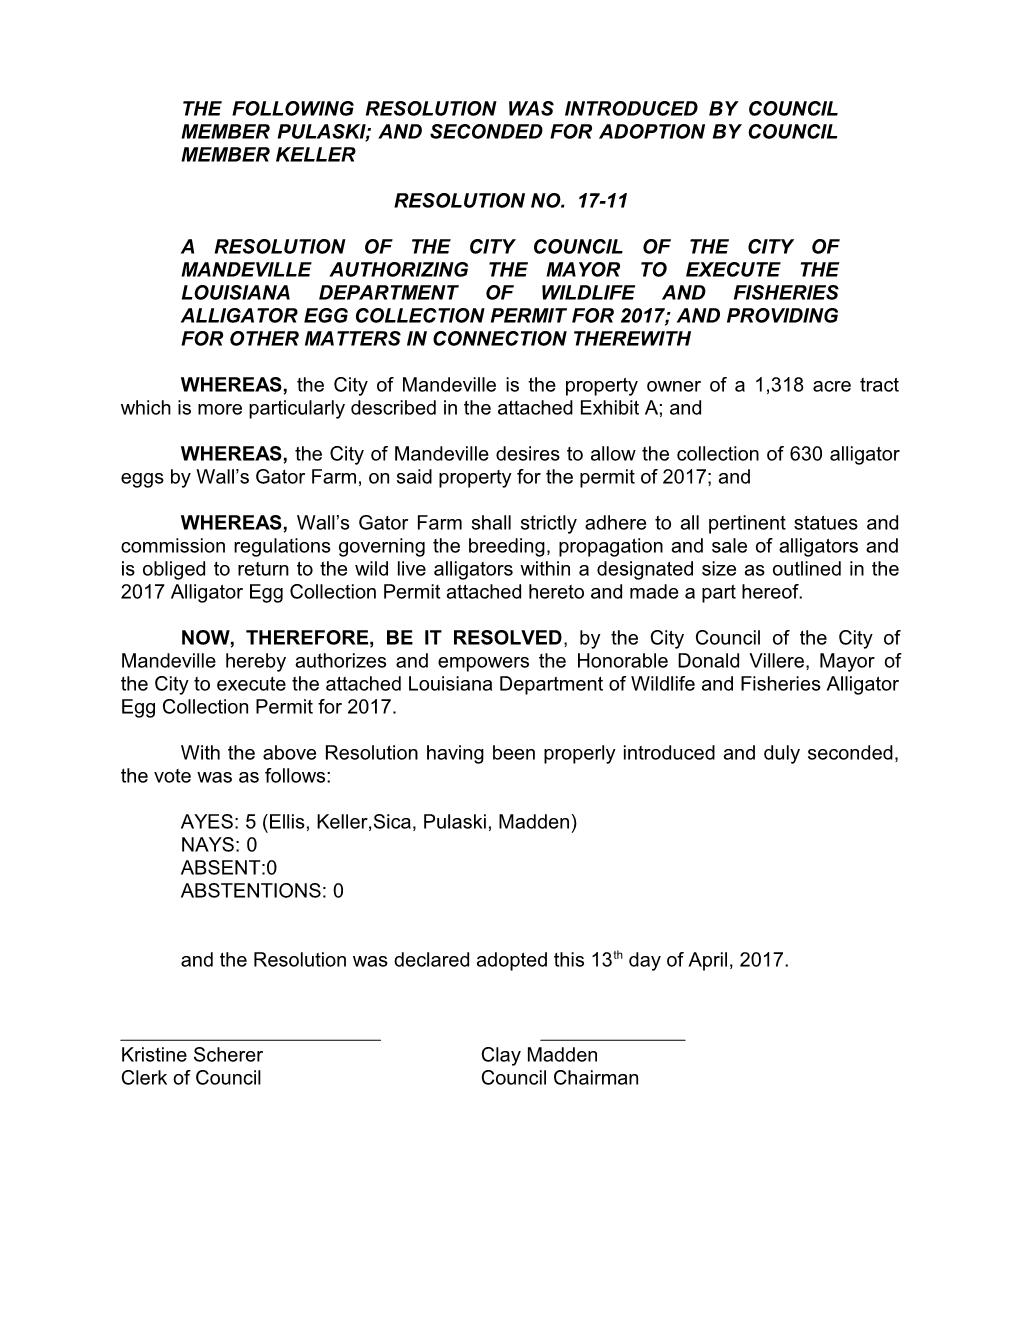 The Following Resolution Was Introduced by Council Member Pulaski; and Seconded for Adoption